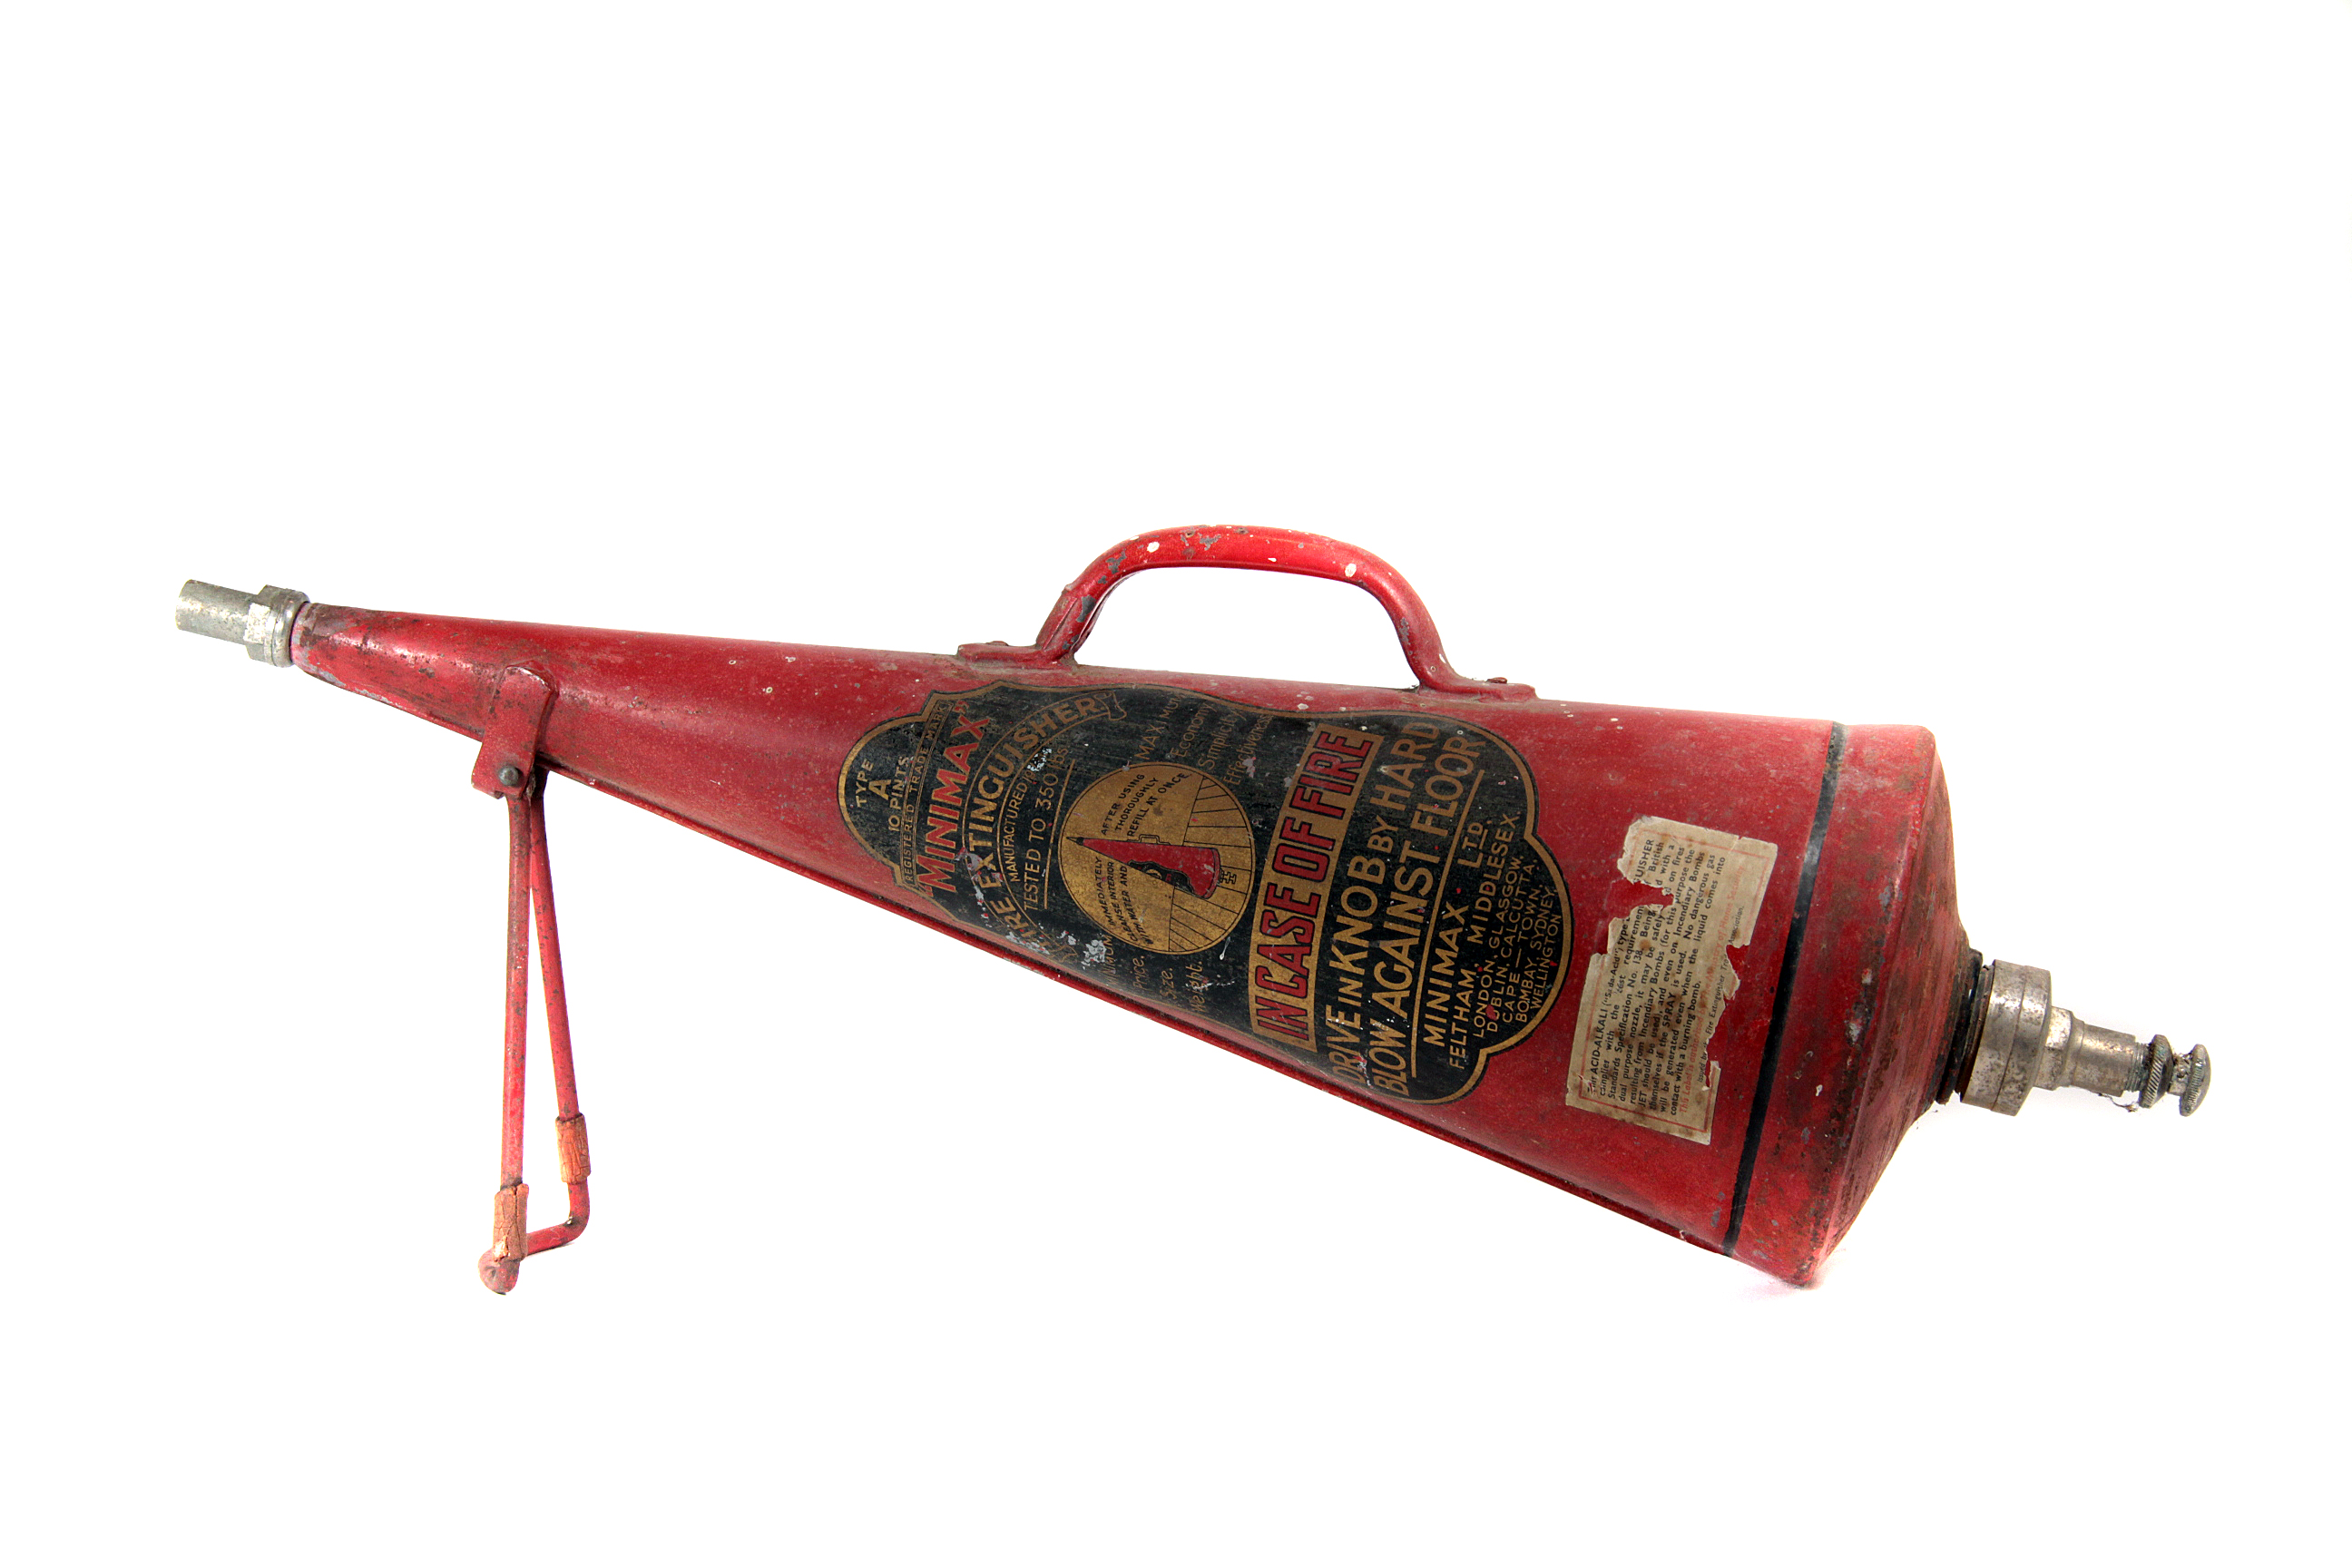 A pre-war garage fire-extinguisher by “Minimax Ltd” c1930s: large conical form with maker’s